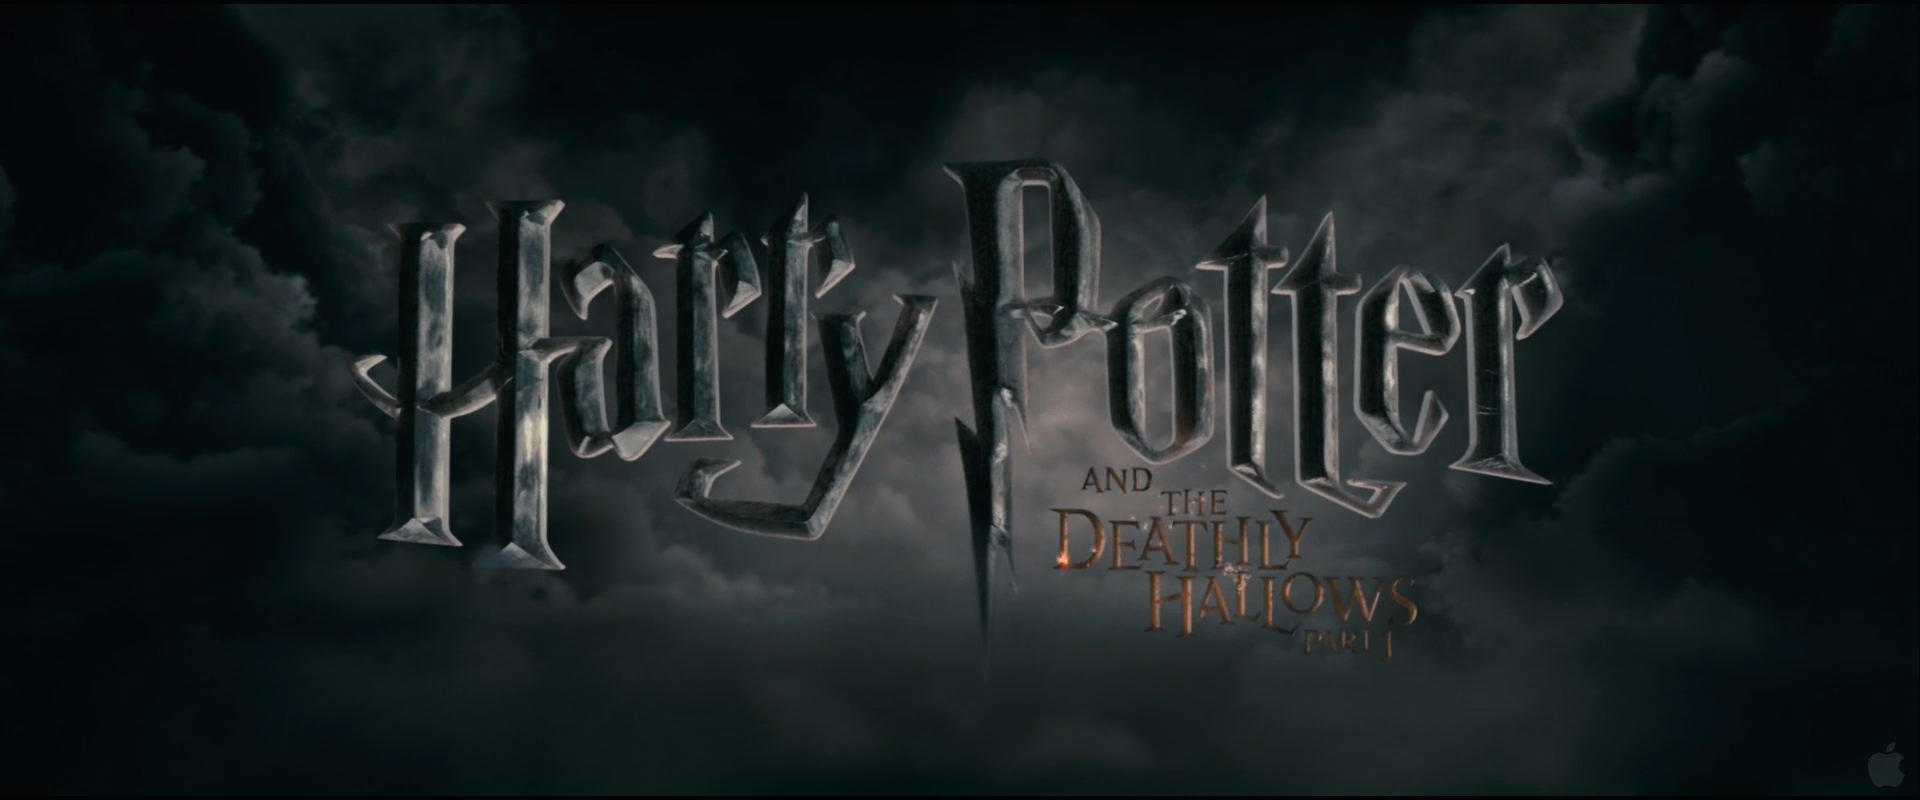 Harry Potter And The Deathly Hallows Movie Logo Desktop Wallpaper